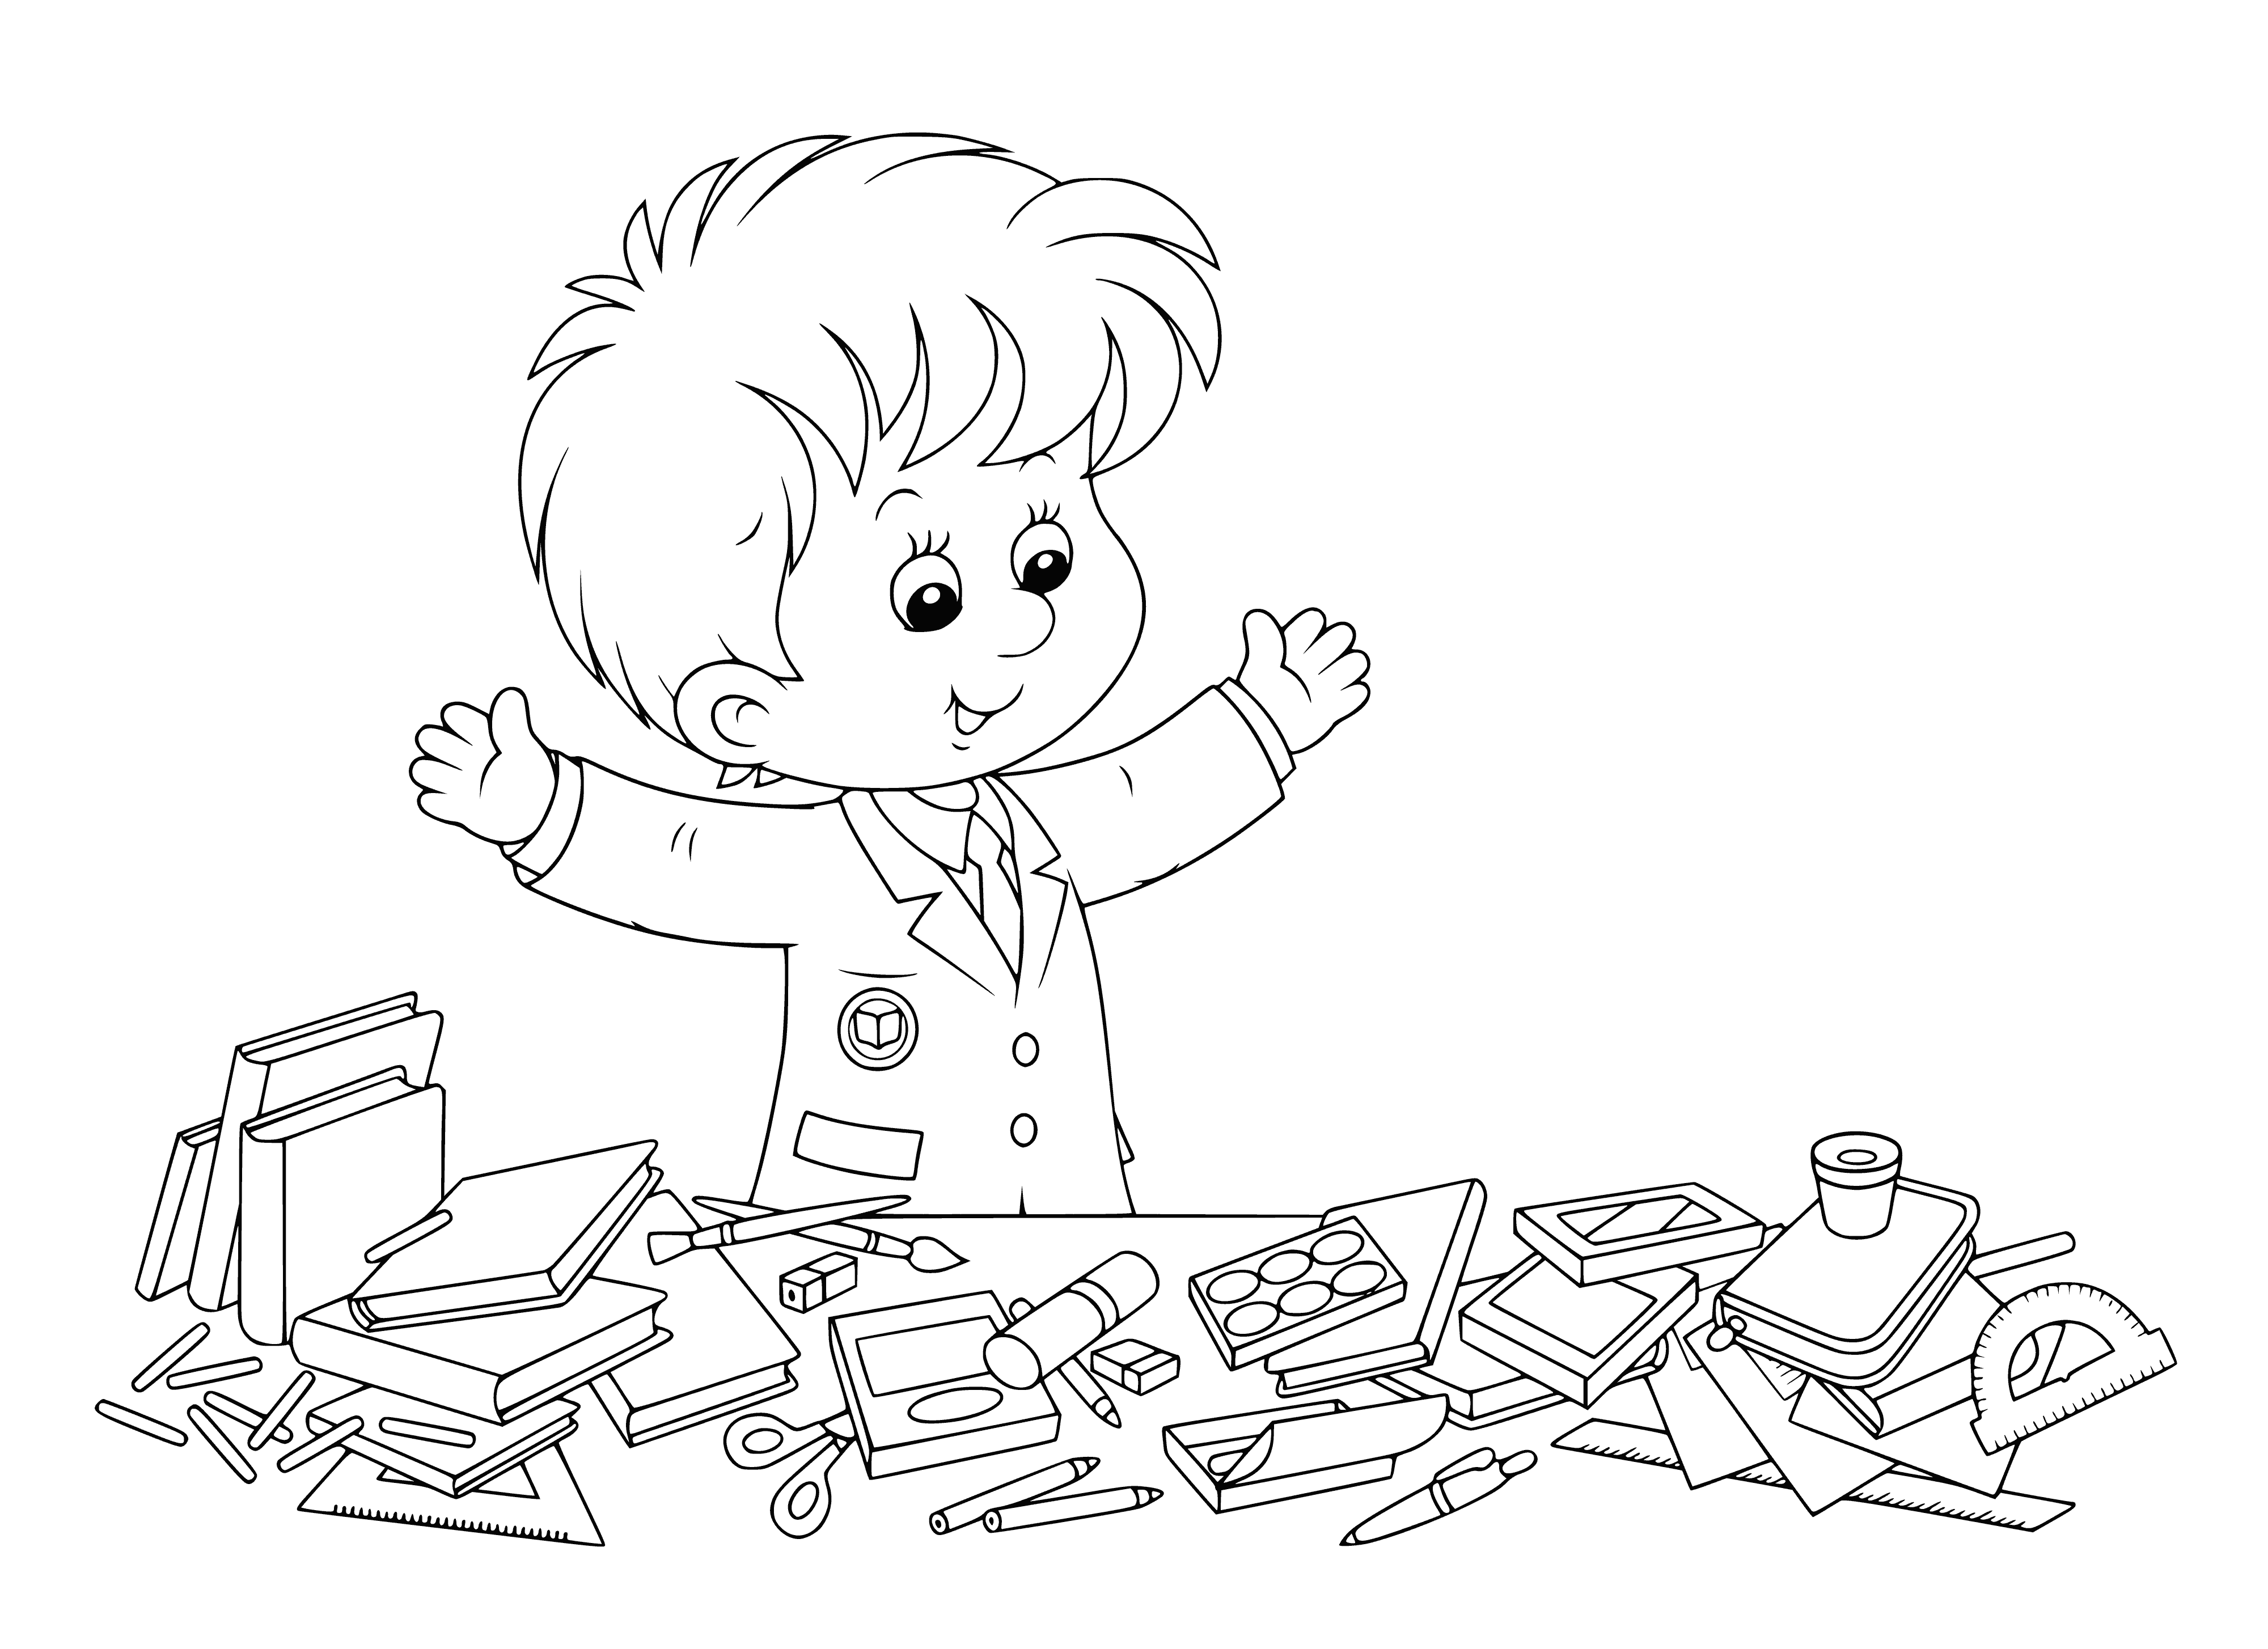 coloring page: Boy excited & nervous on first day of school, carrying briefcase & walking past lockers.